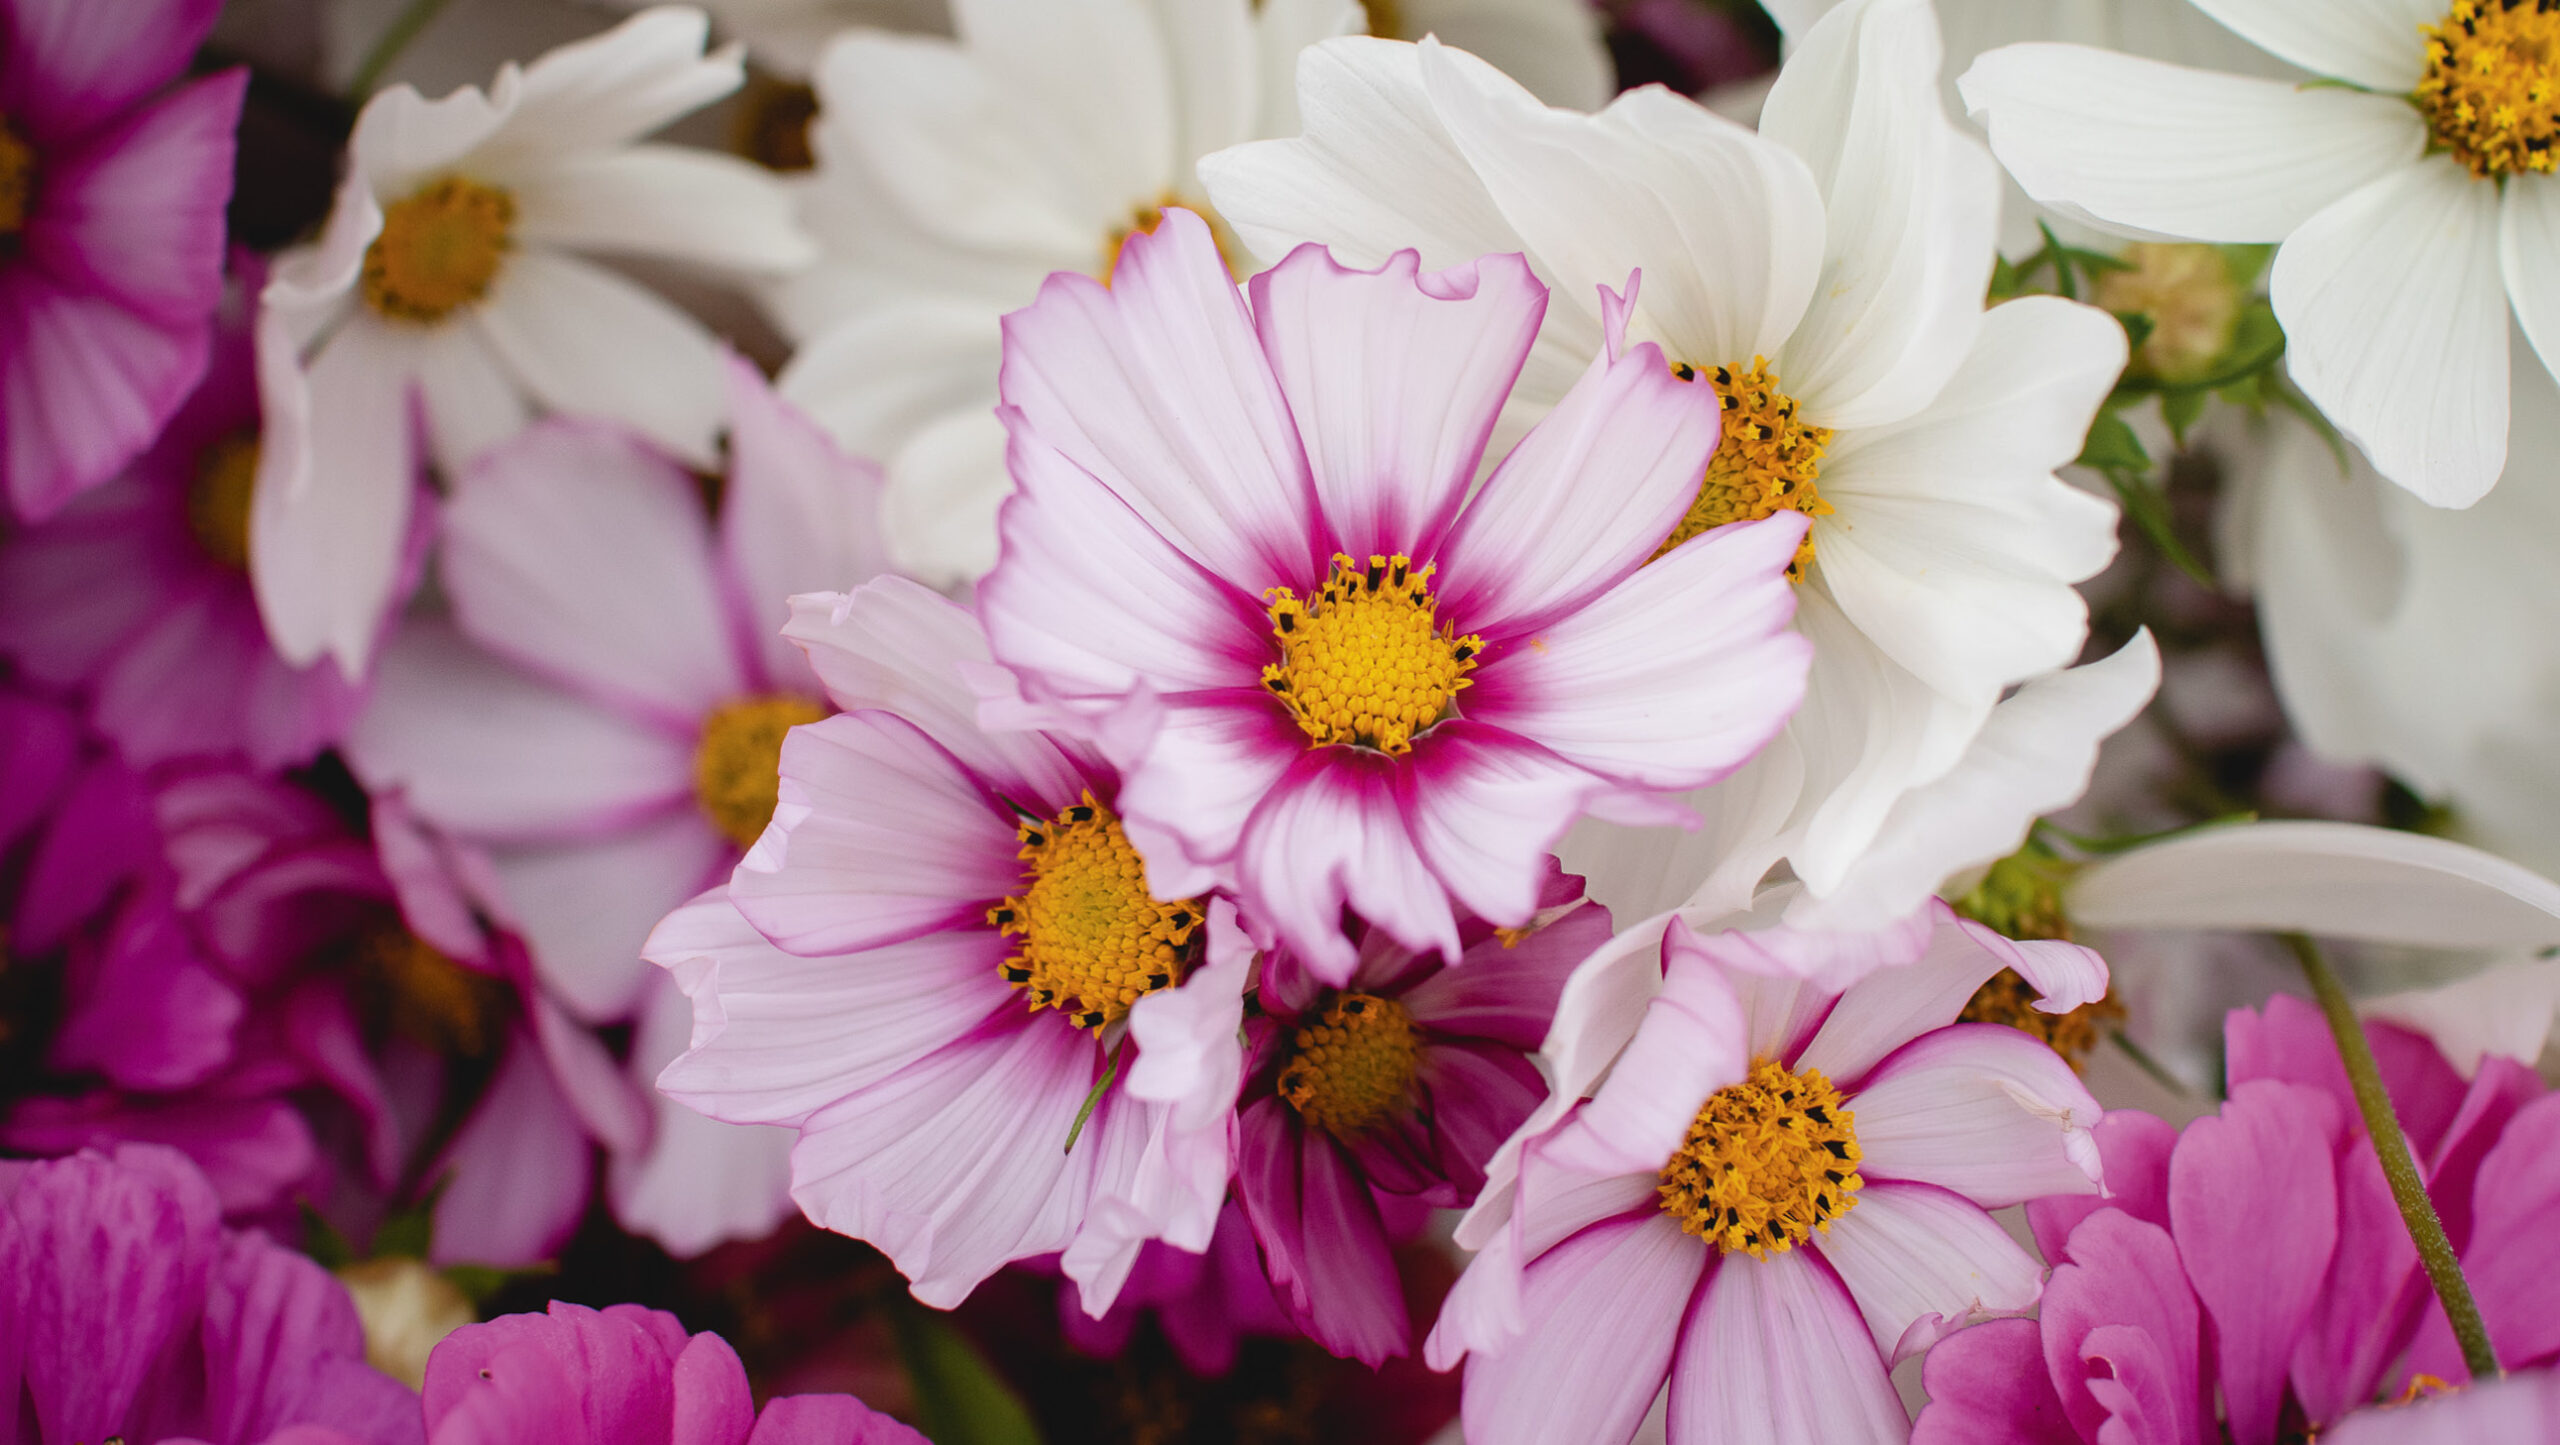 A mix of 'Picote' and 'Purity' cosmos flowers.